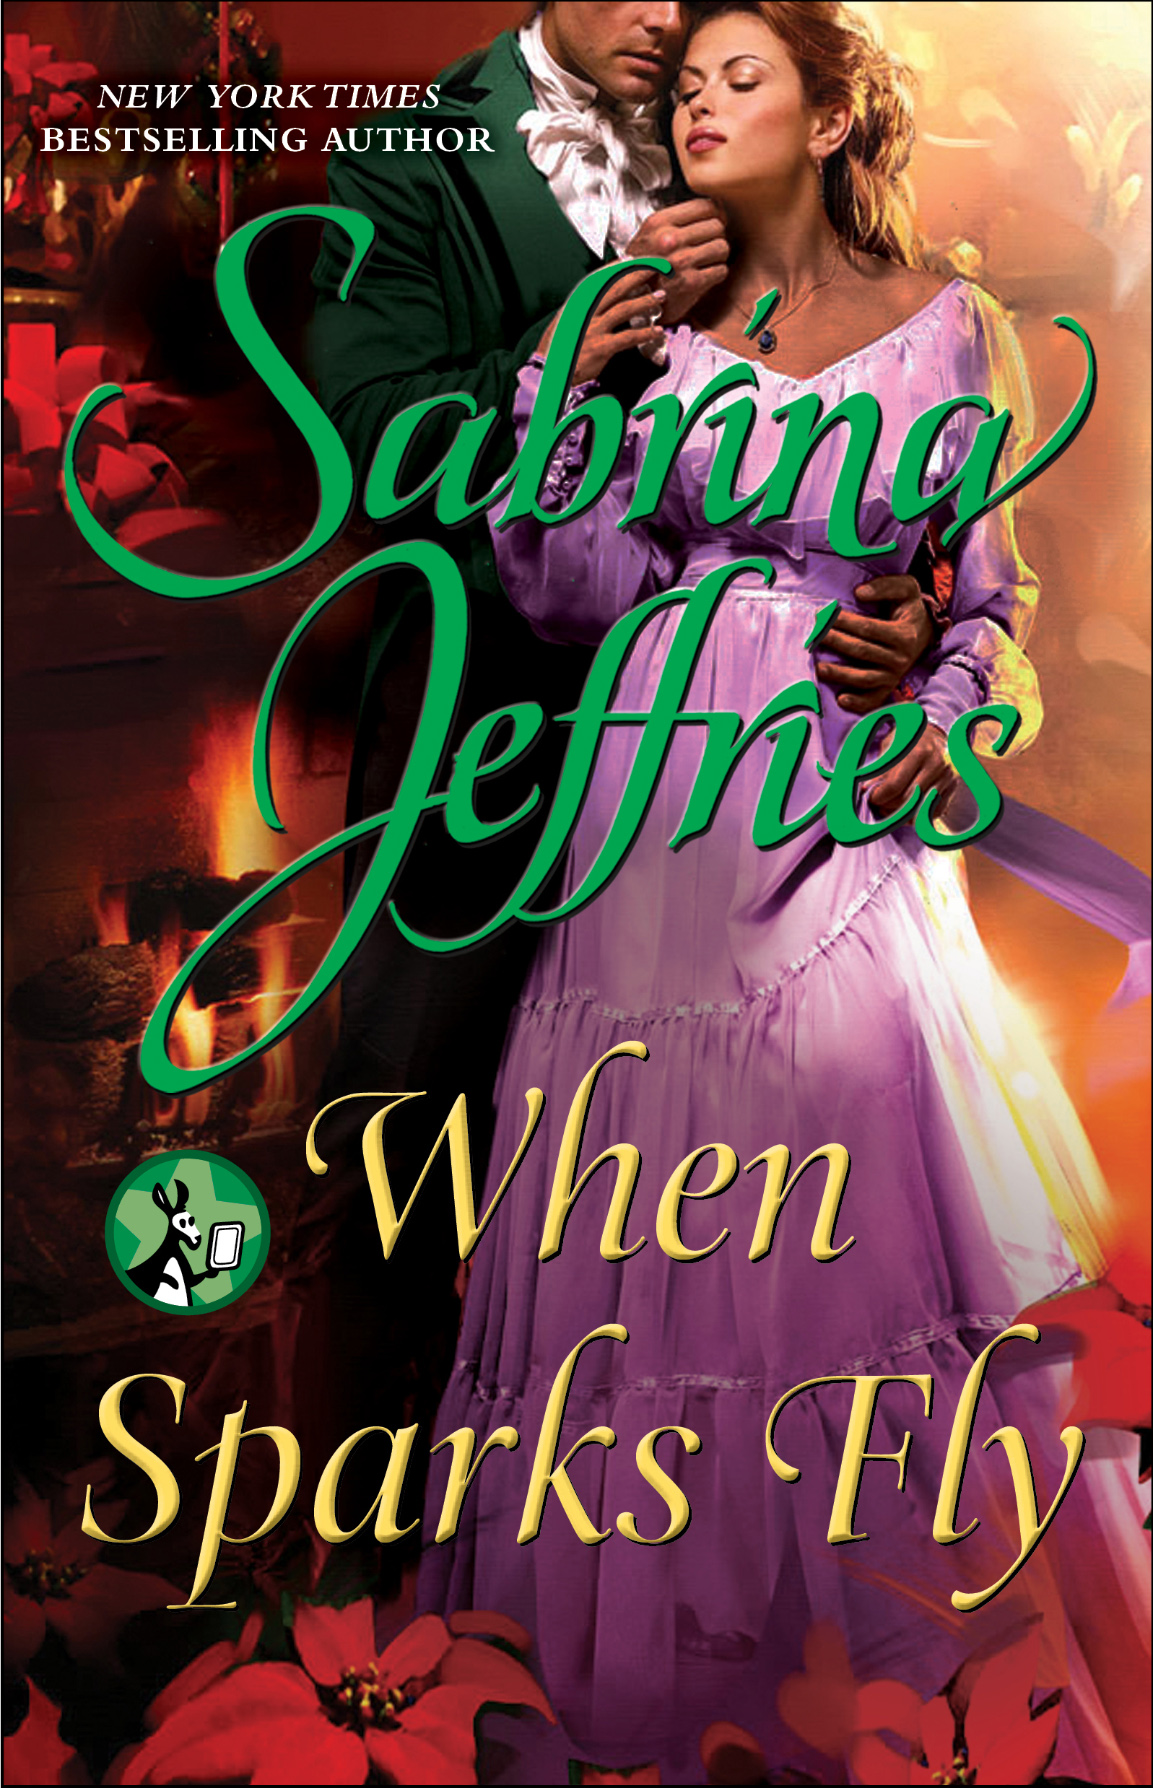 When Sparks Fly by Sabrina Jeffries